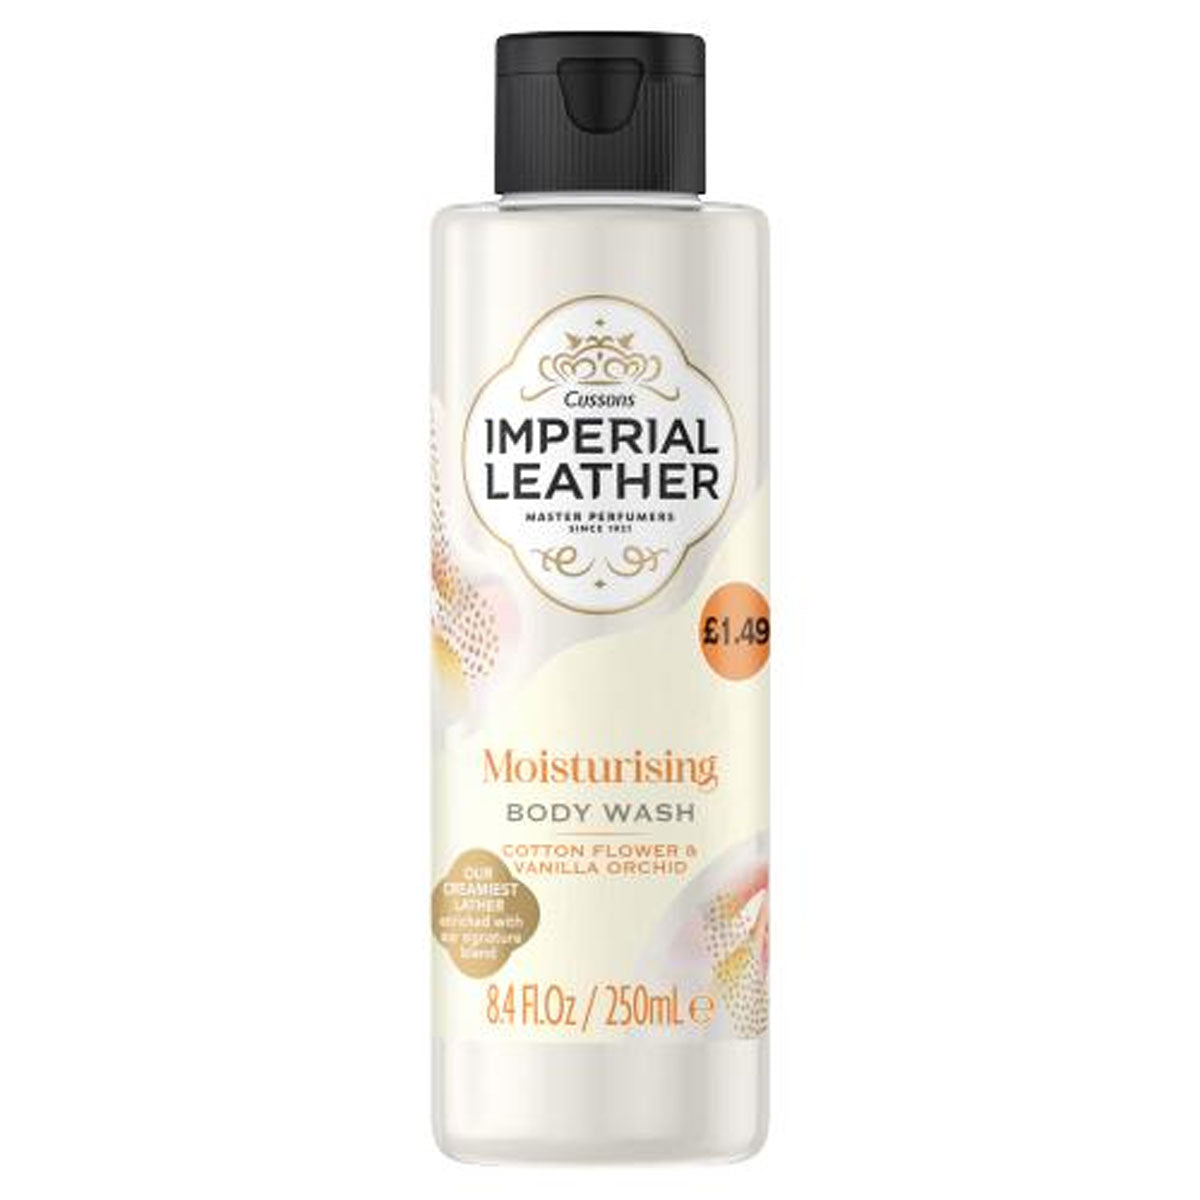 Imperial Leather - Moisturising Body Wash Cotton Flower & Vanilla Orchid - 250ml - Continental Food Store